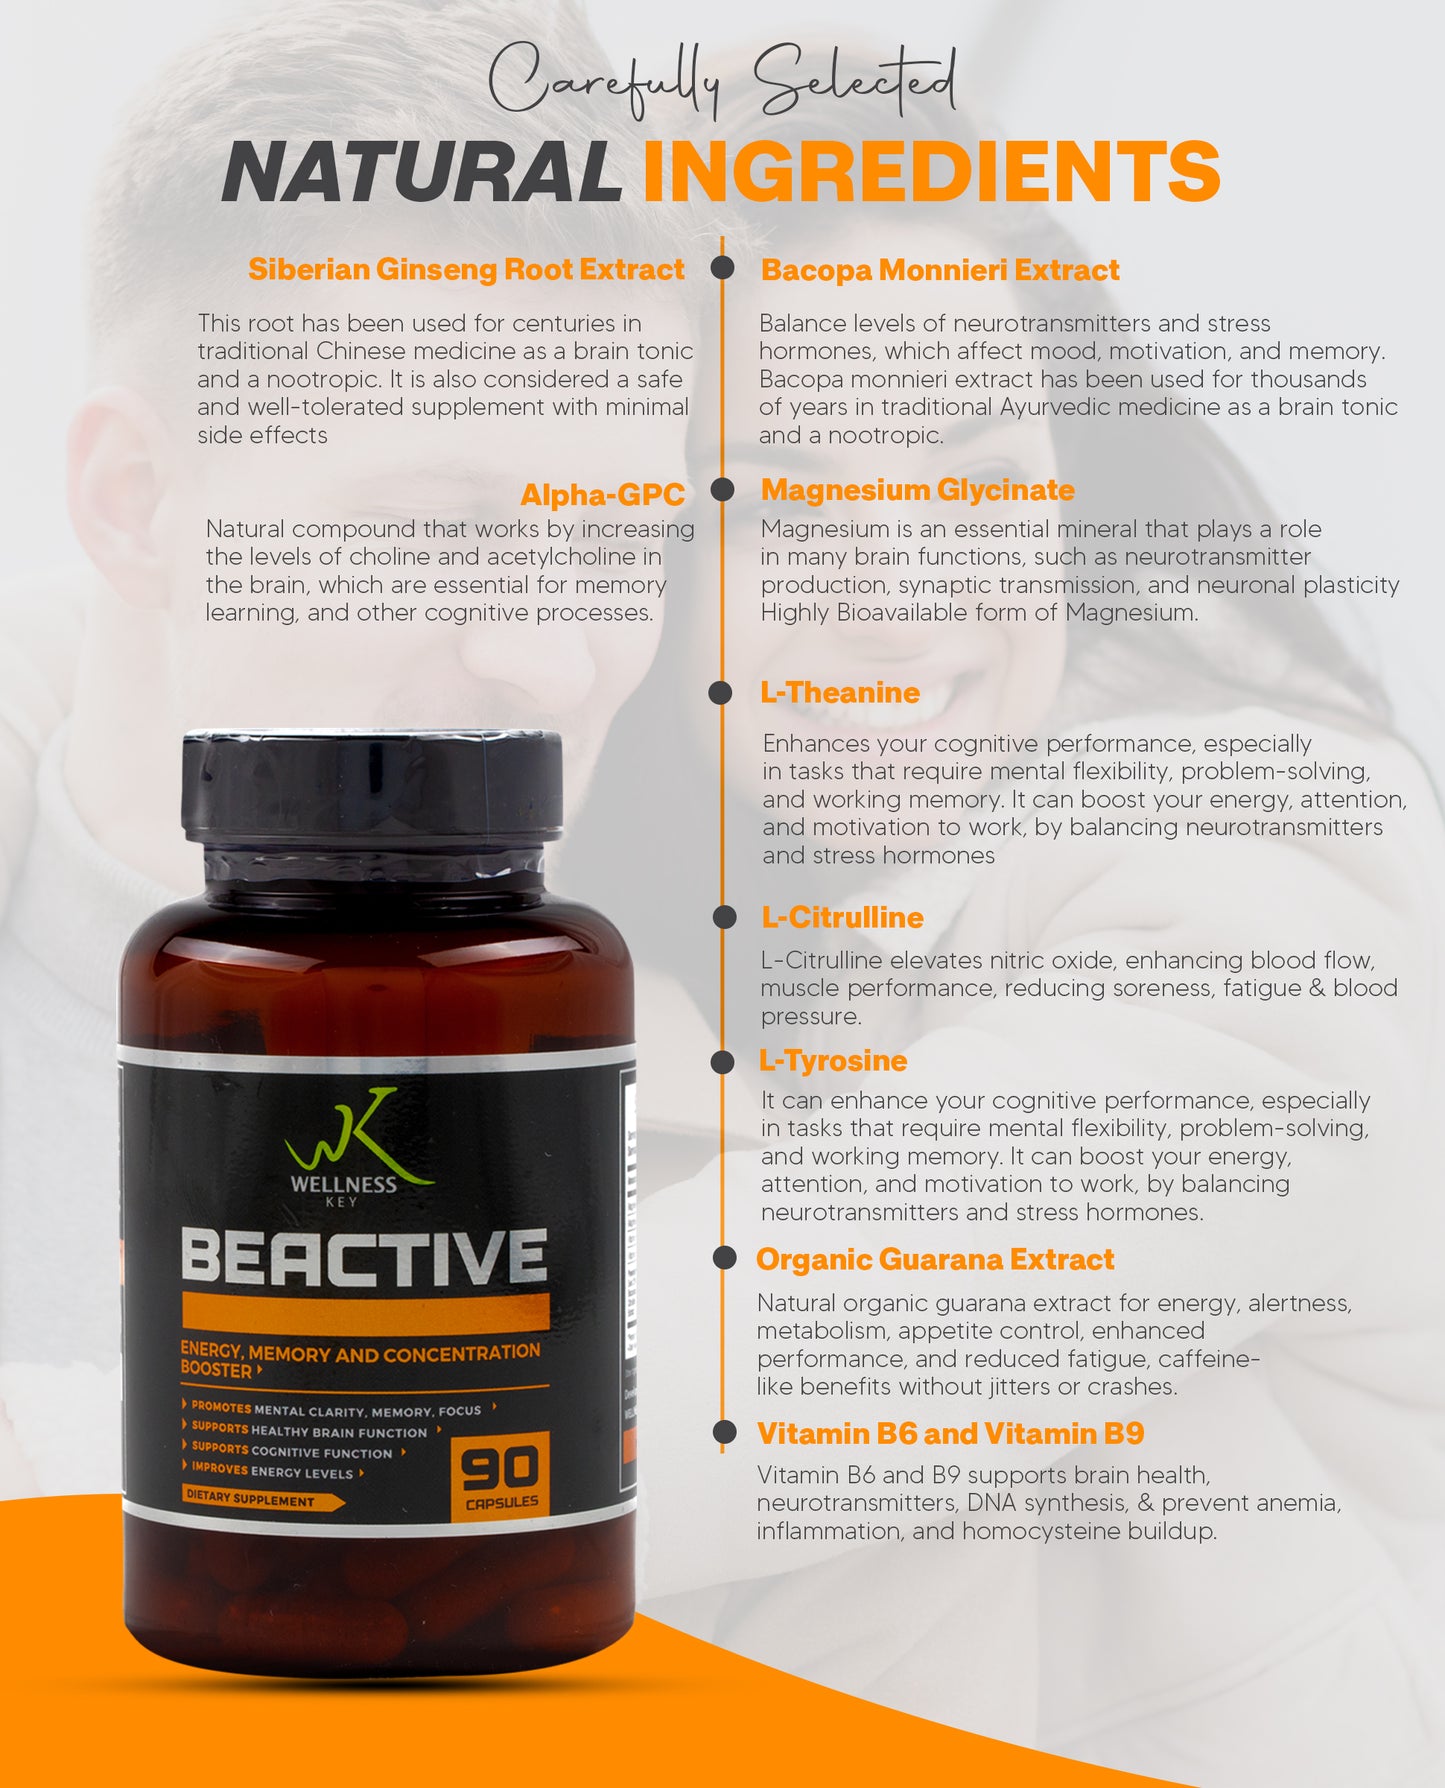 BeActive by Wellness Key for Clarity, Focus and Concentration | Supports Cognitive Function | Natural Ingredients | 90 capsules |